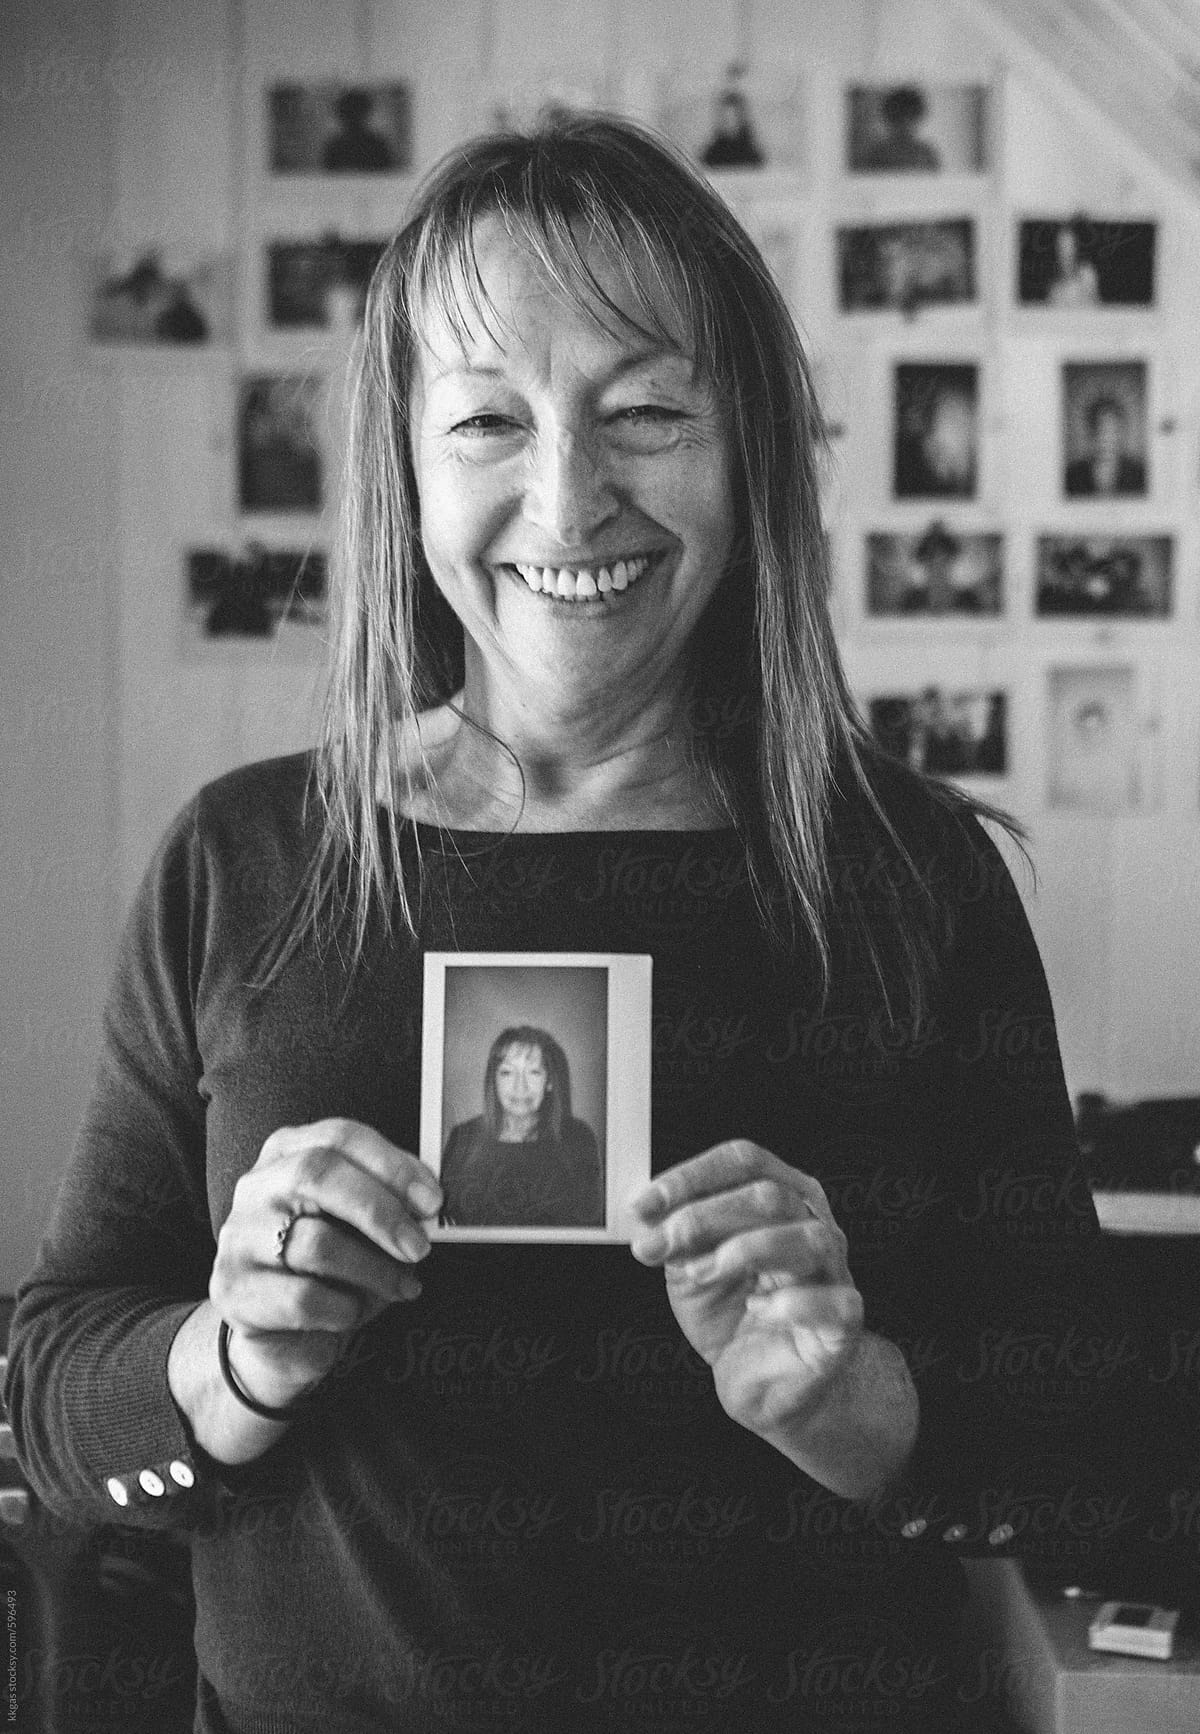 Black and white Portrait of a woman holding an instant photo of herself